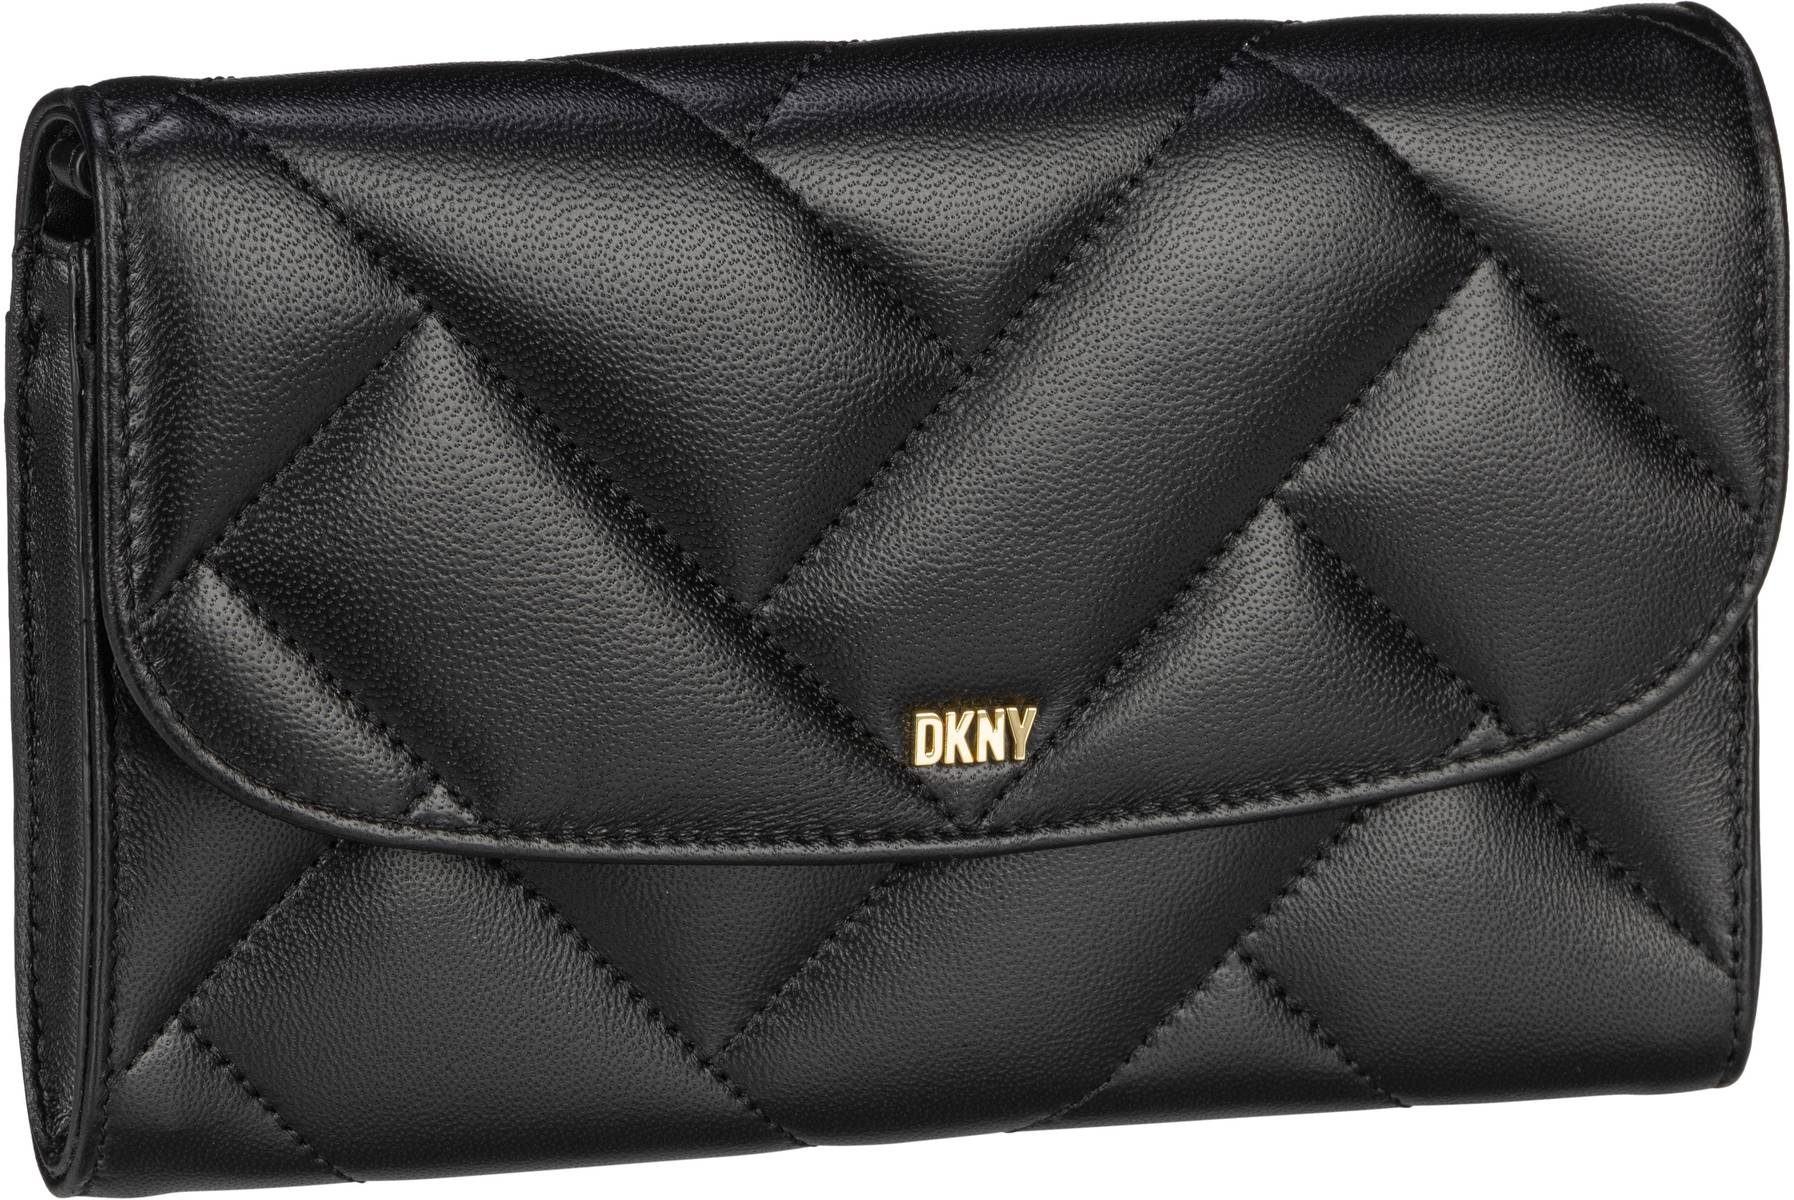 dkny -  Abendtasche & Clutch Sidney Quilted Leather Wallet On Chain Black/Gold (1 Liter)